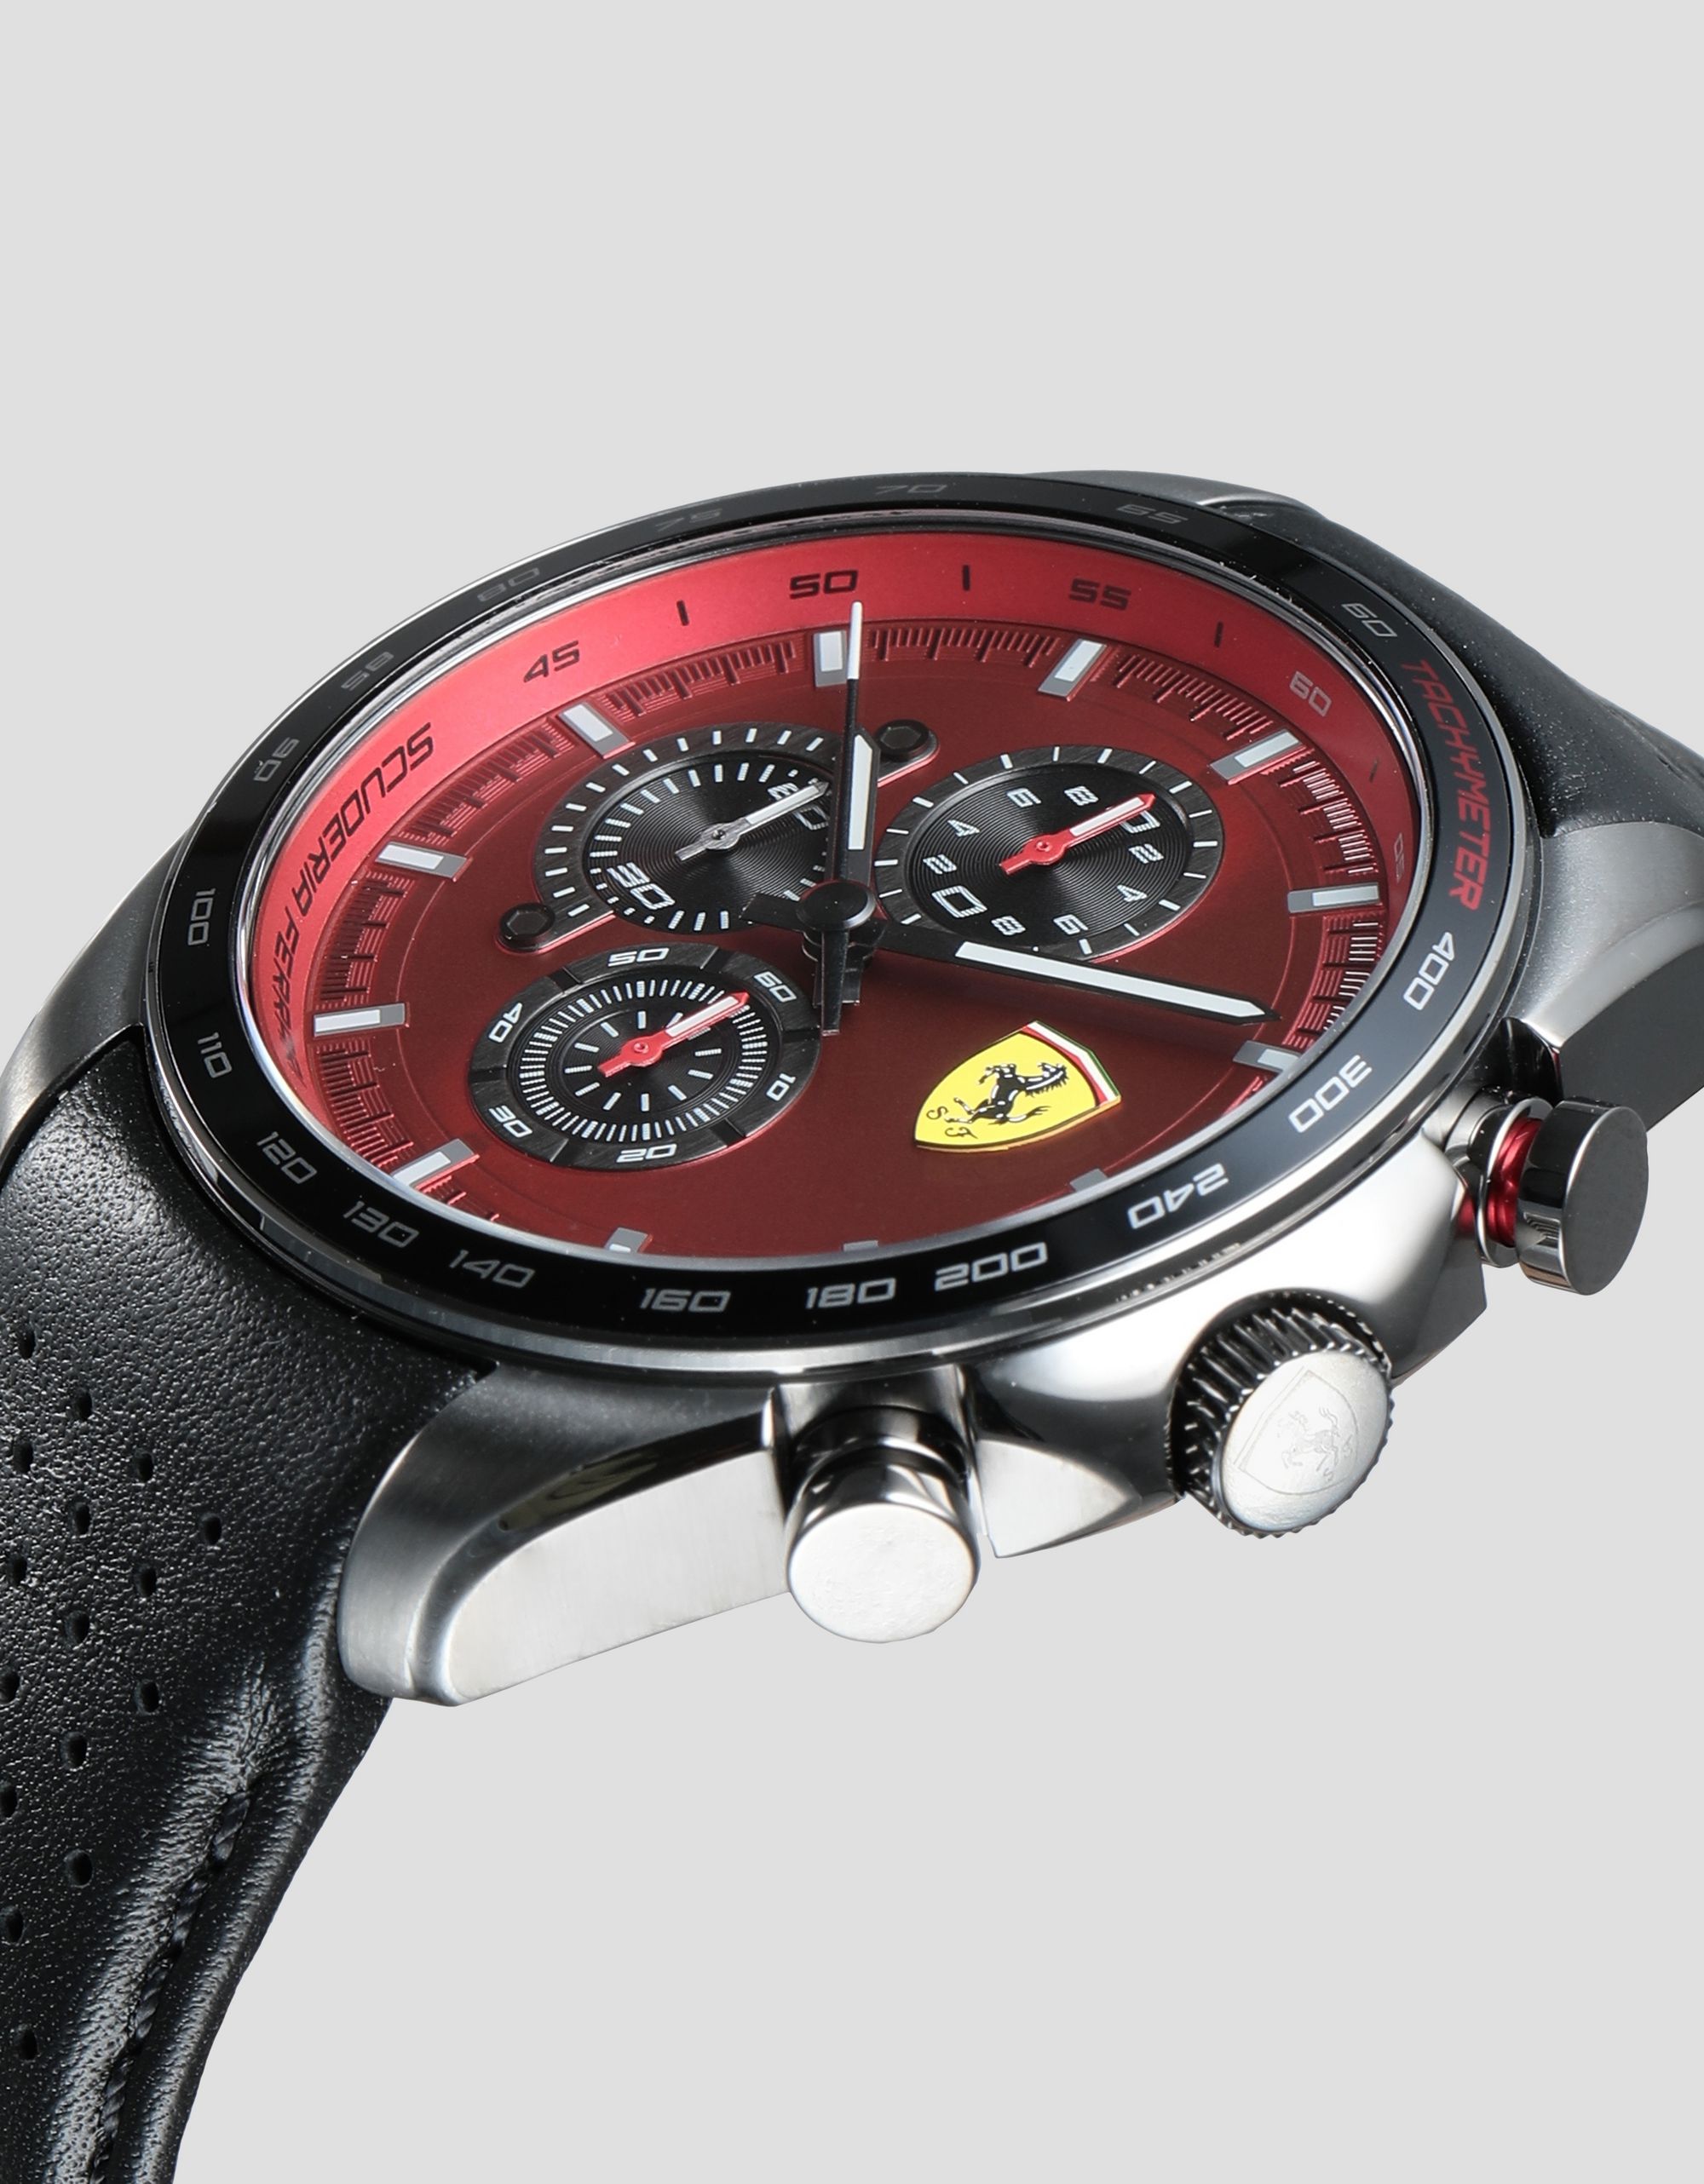 Ferrari Speedracer chronograph watch with perforated leather strap and ...